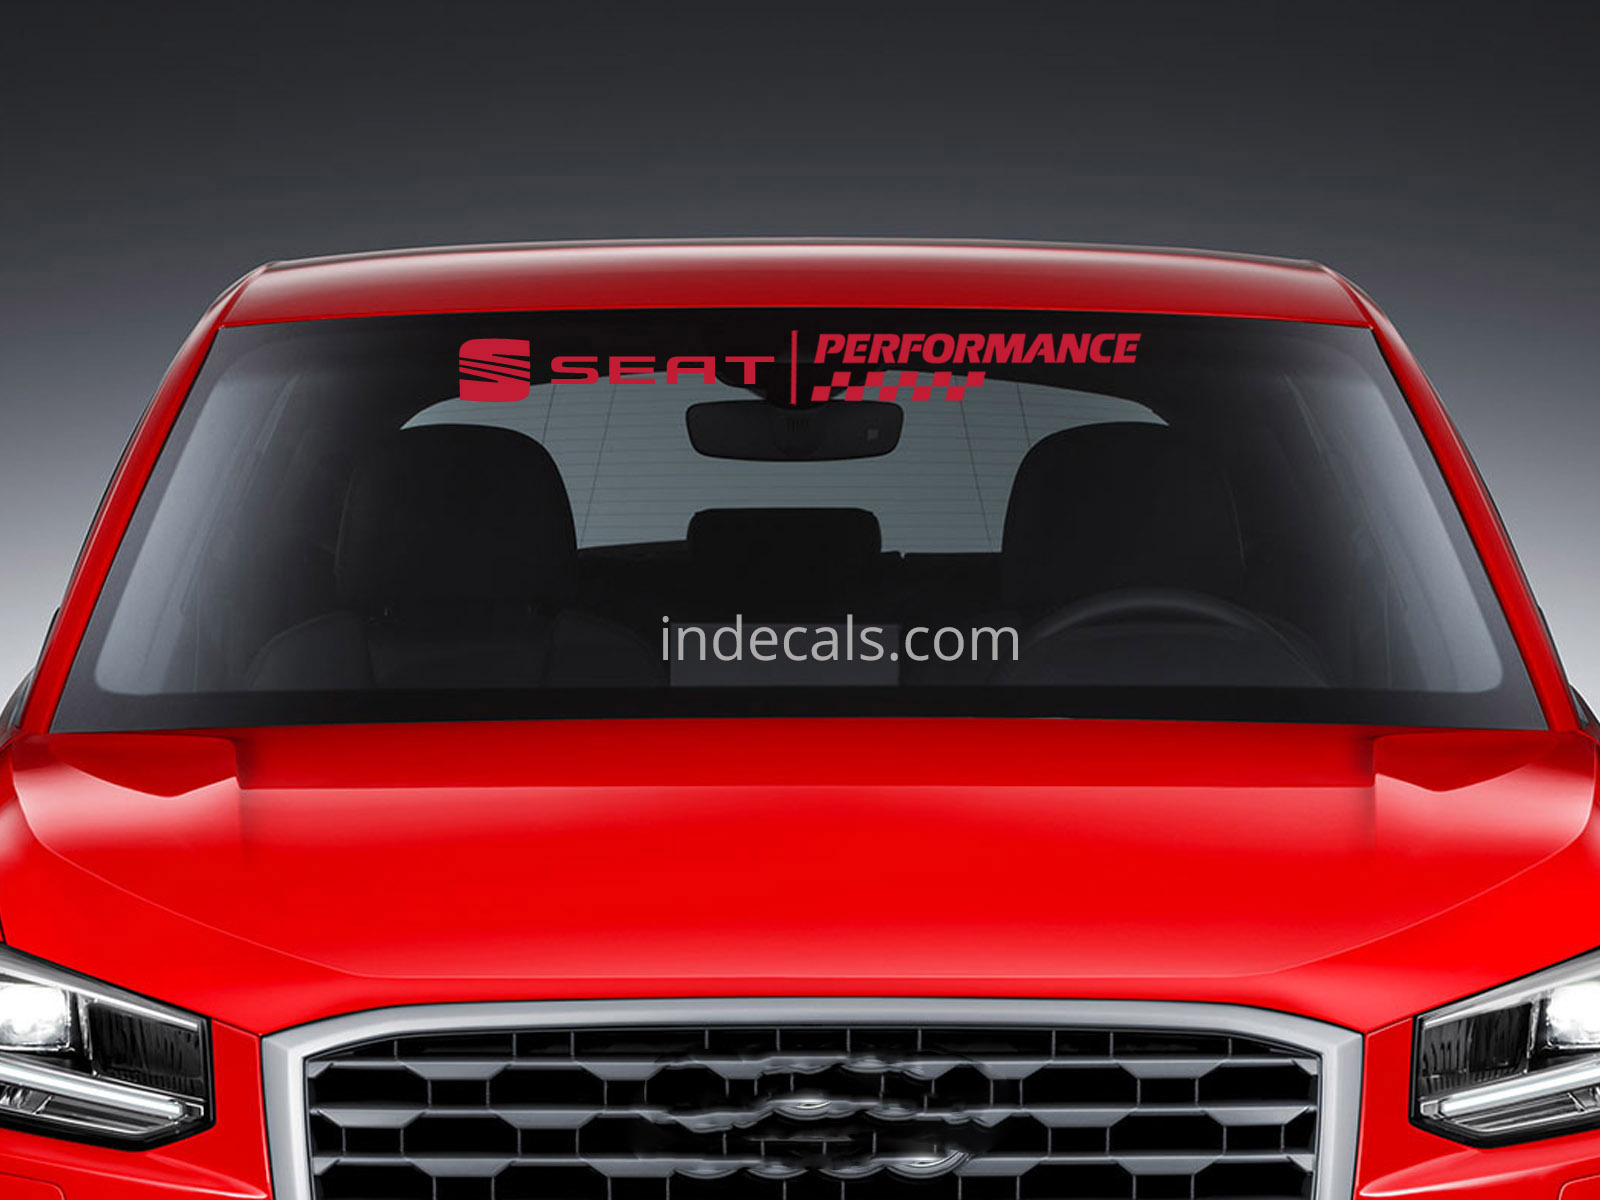 1 x Seat Performance Sticker for Windshield or Back Window - Red